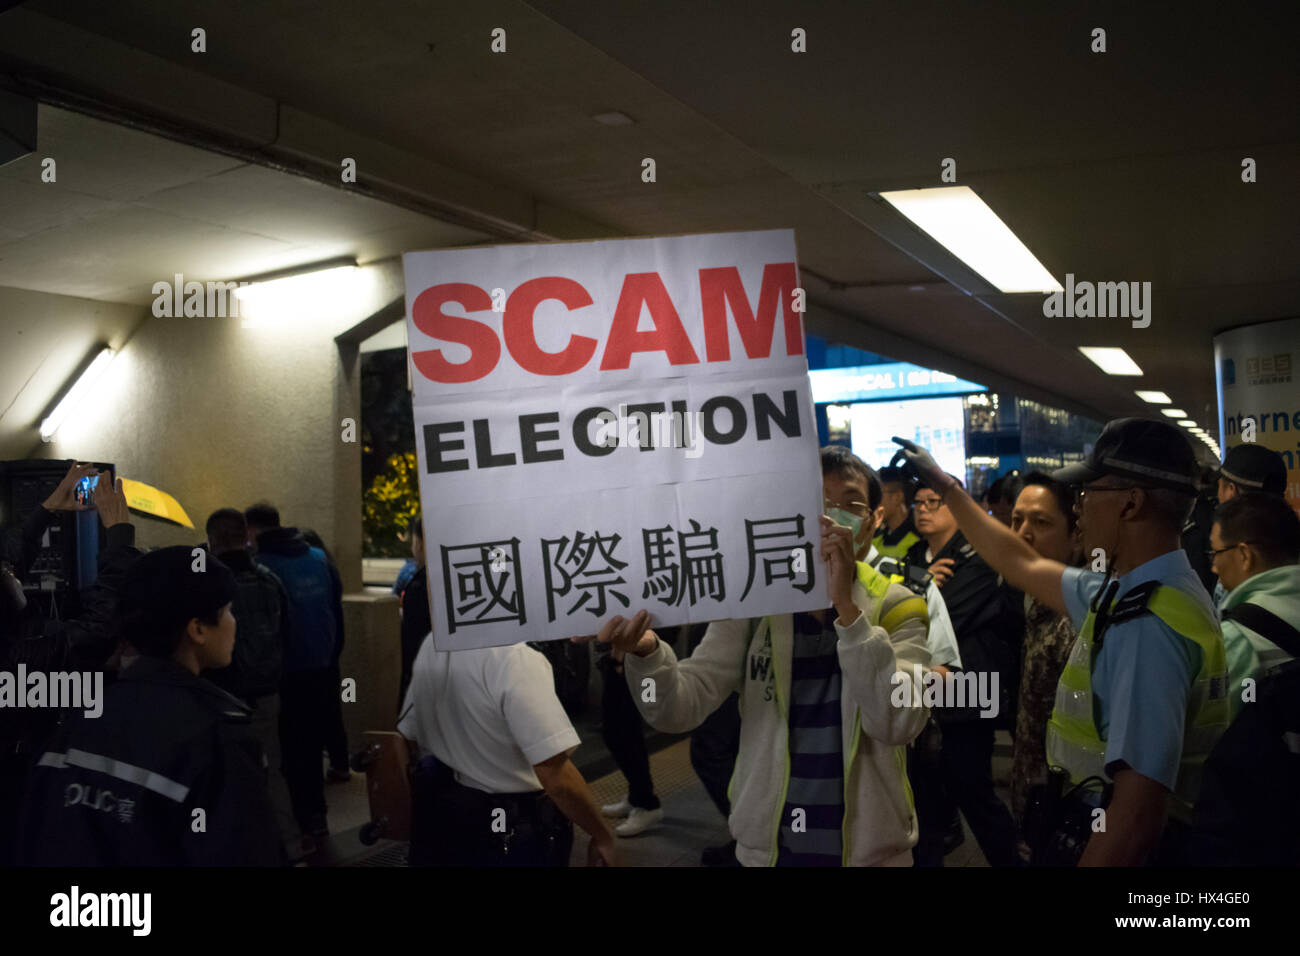 Hong Kong SAR, China. 25th March, 2017. Protester showing a message during pro-democracy demonstration, amid strong police presence, as Hong Kong votes for a new Chief Executive (city's leader) in Hong Kong, China. © RaymondAsiaPhotography / Alamy Live News. Stock Photo